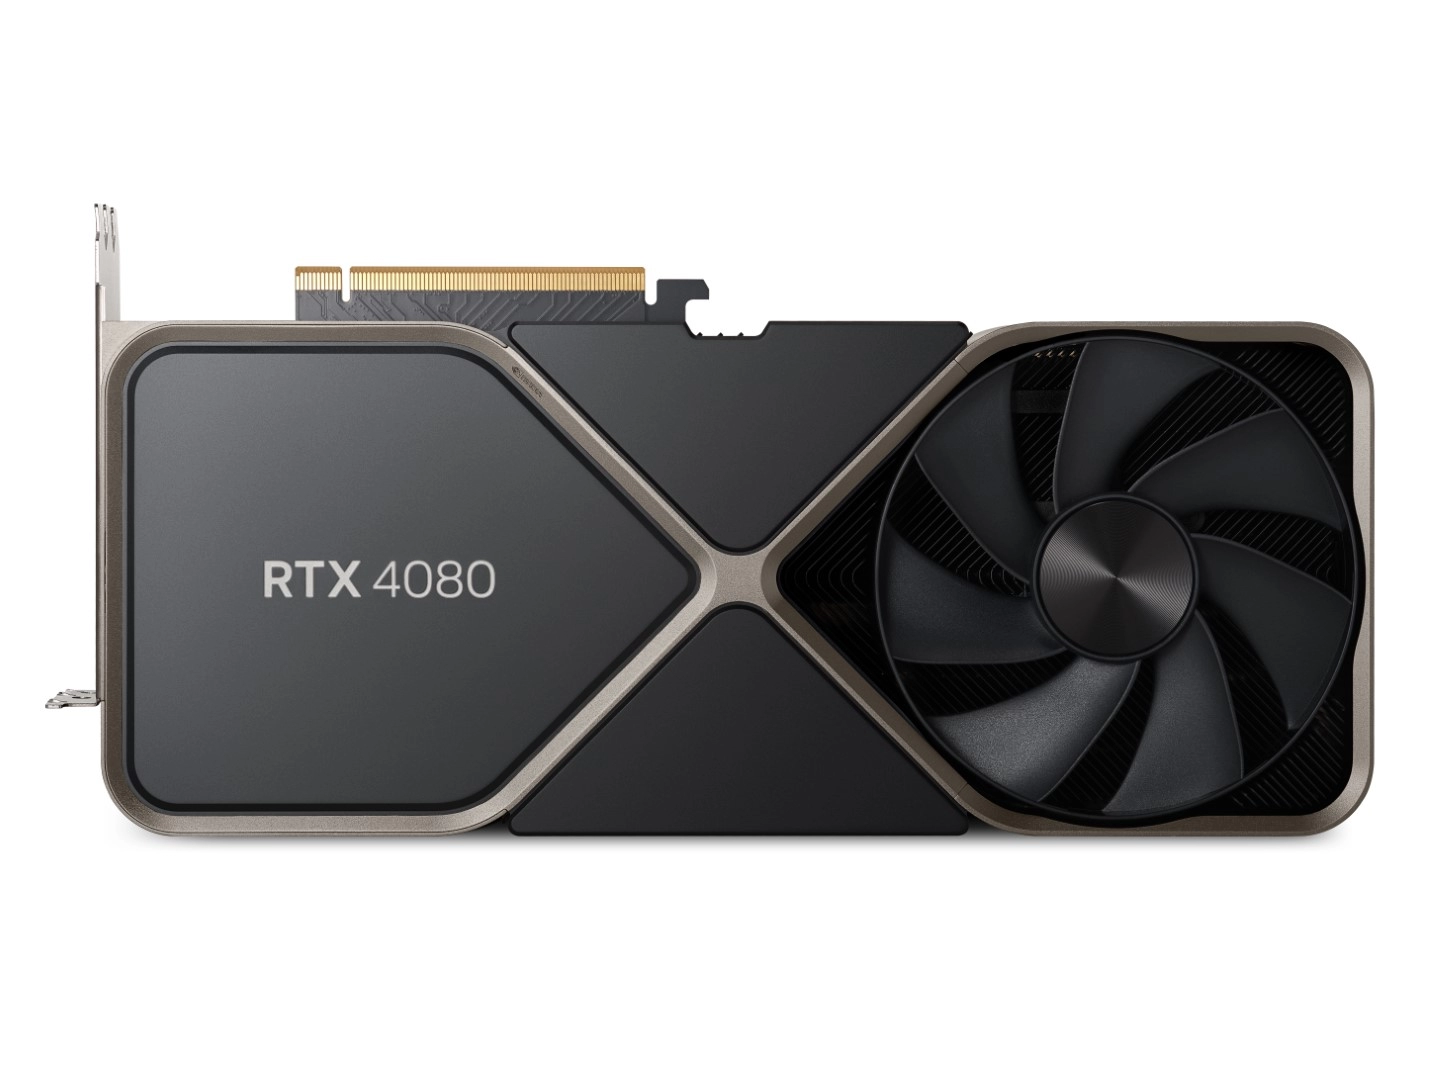 NVIDIA GeForce RTX 4080 Founders Edition Image